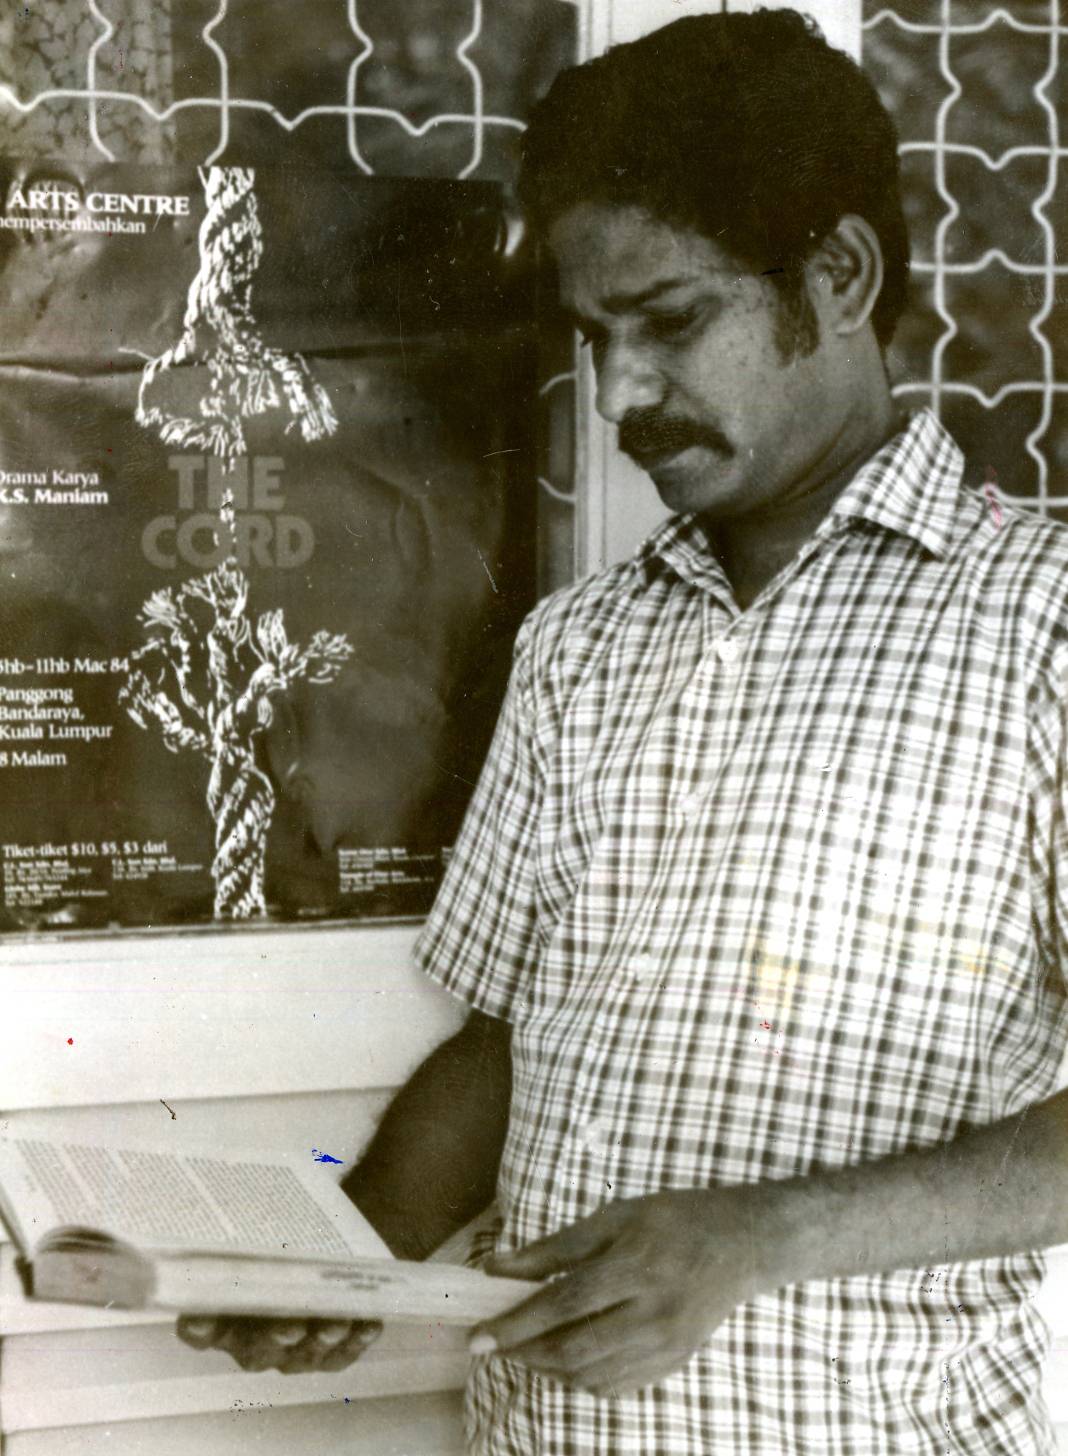 K.S. Maniam standing before a poster of his play, The Cord, in 1984. Img from The Star